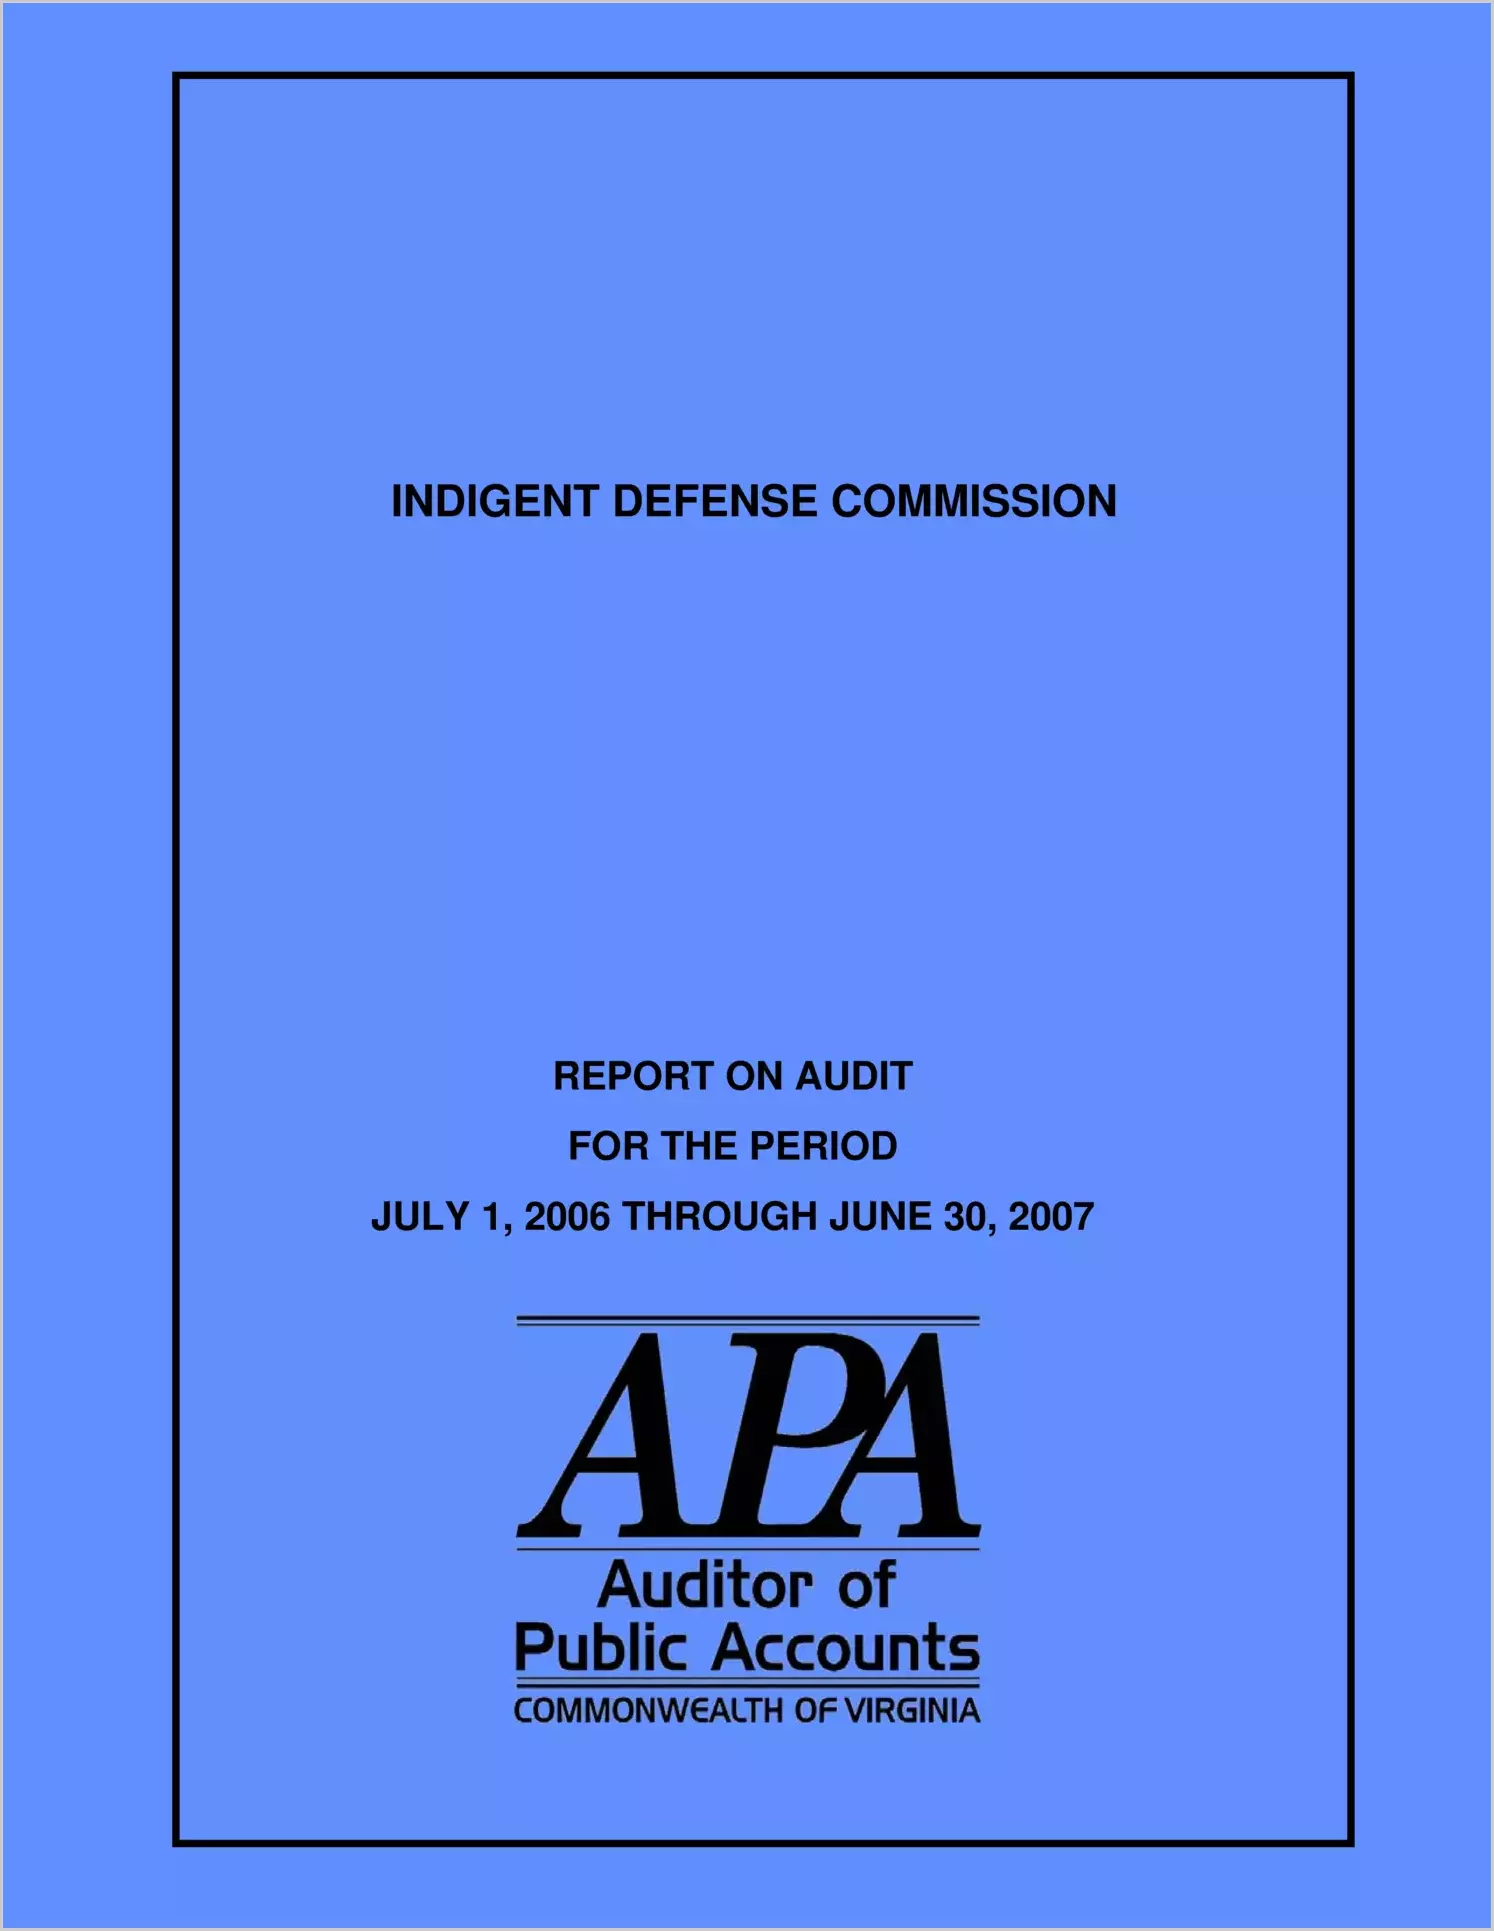 Indigent Defense Commission Report on Audit for the period July 1, 2006 through June 30, 2007